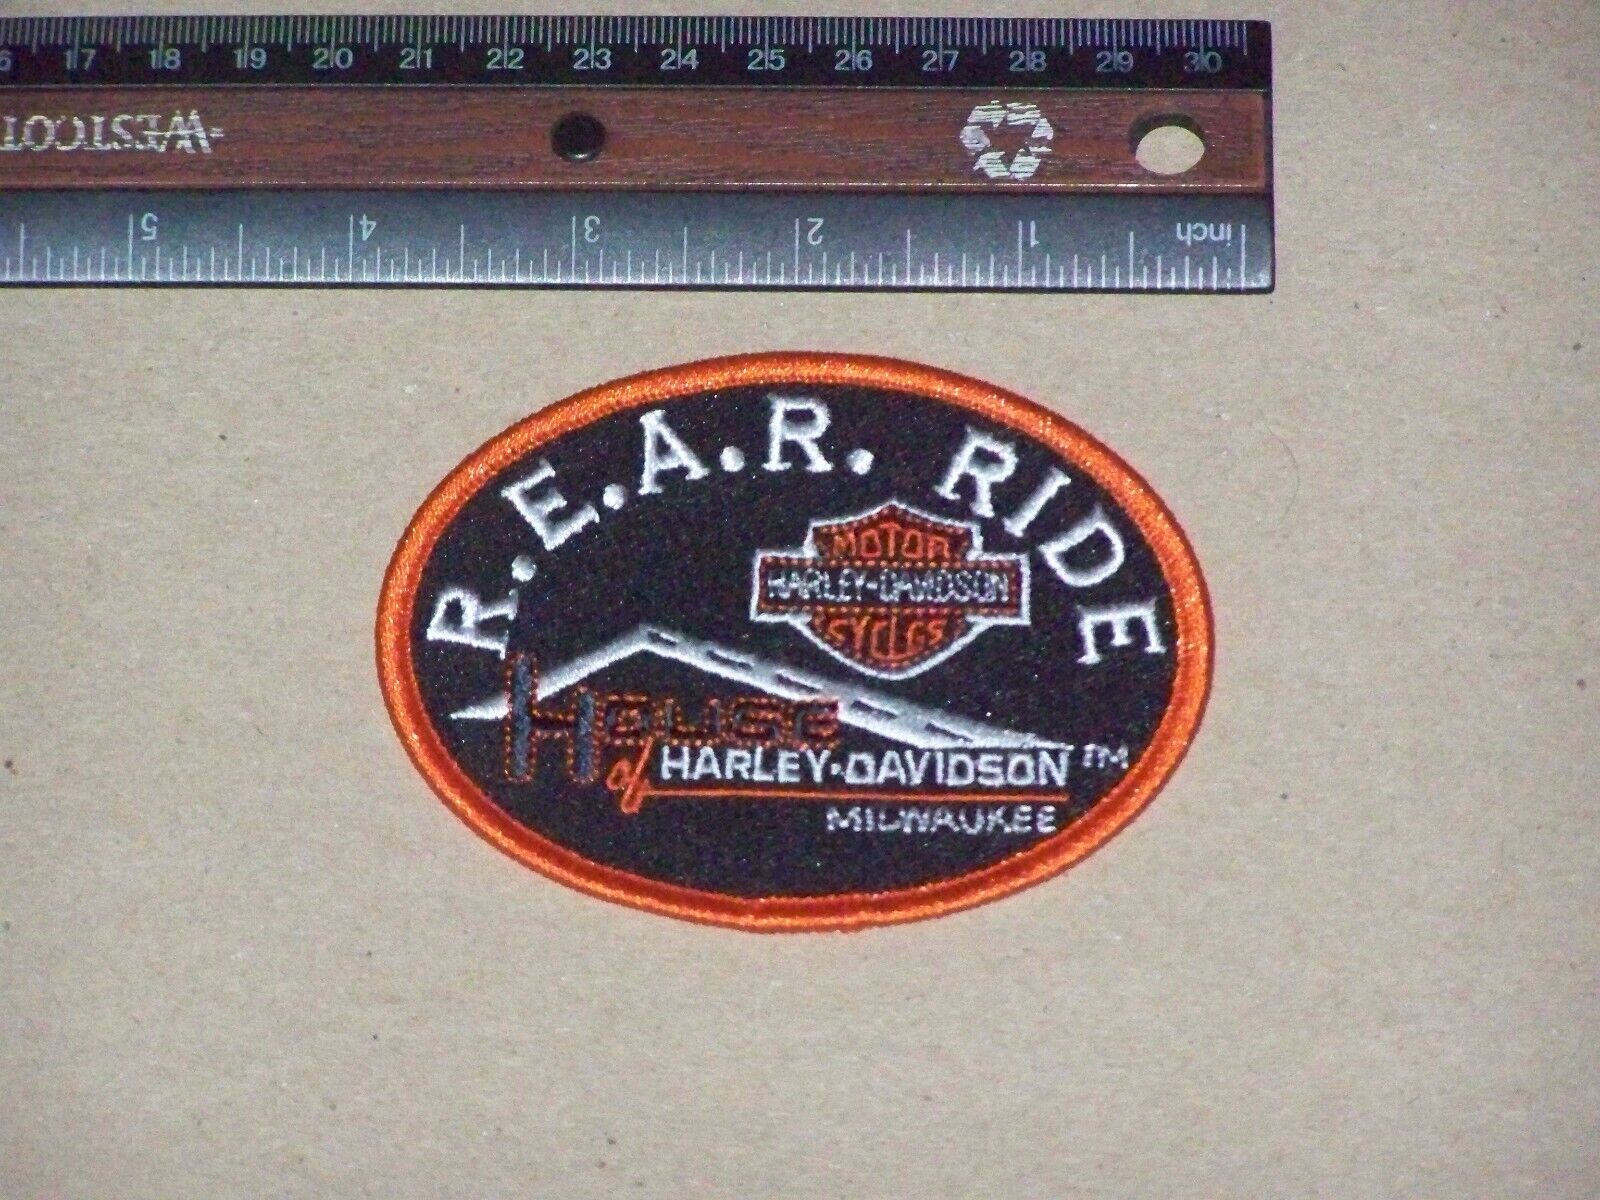 RARE R.E.A.R. RIDE HOUSE of HARLEY DAVIDSON MOTORCYCLES MILWAUKEE Jacket Patch